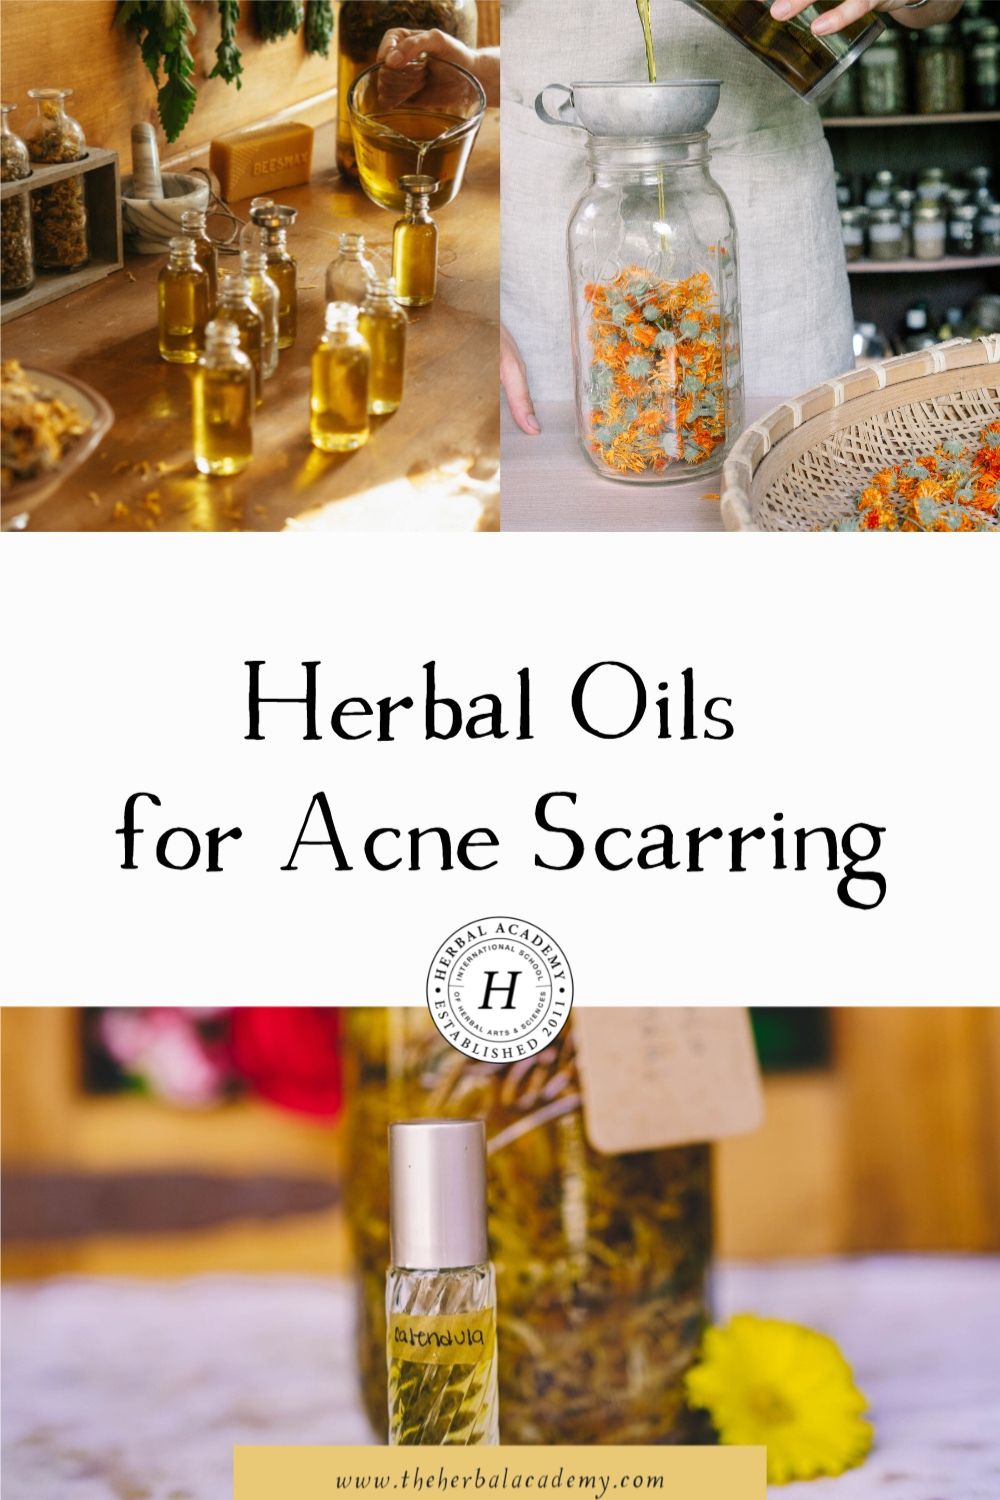 Herbal Oils for Acne Scarring | Herbal Academy | These herbal face oils give our skin the love it needs at just the right time, and are an effective natural option to reduce the chances of acne scarring.